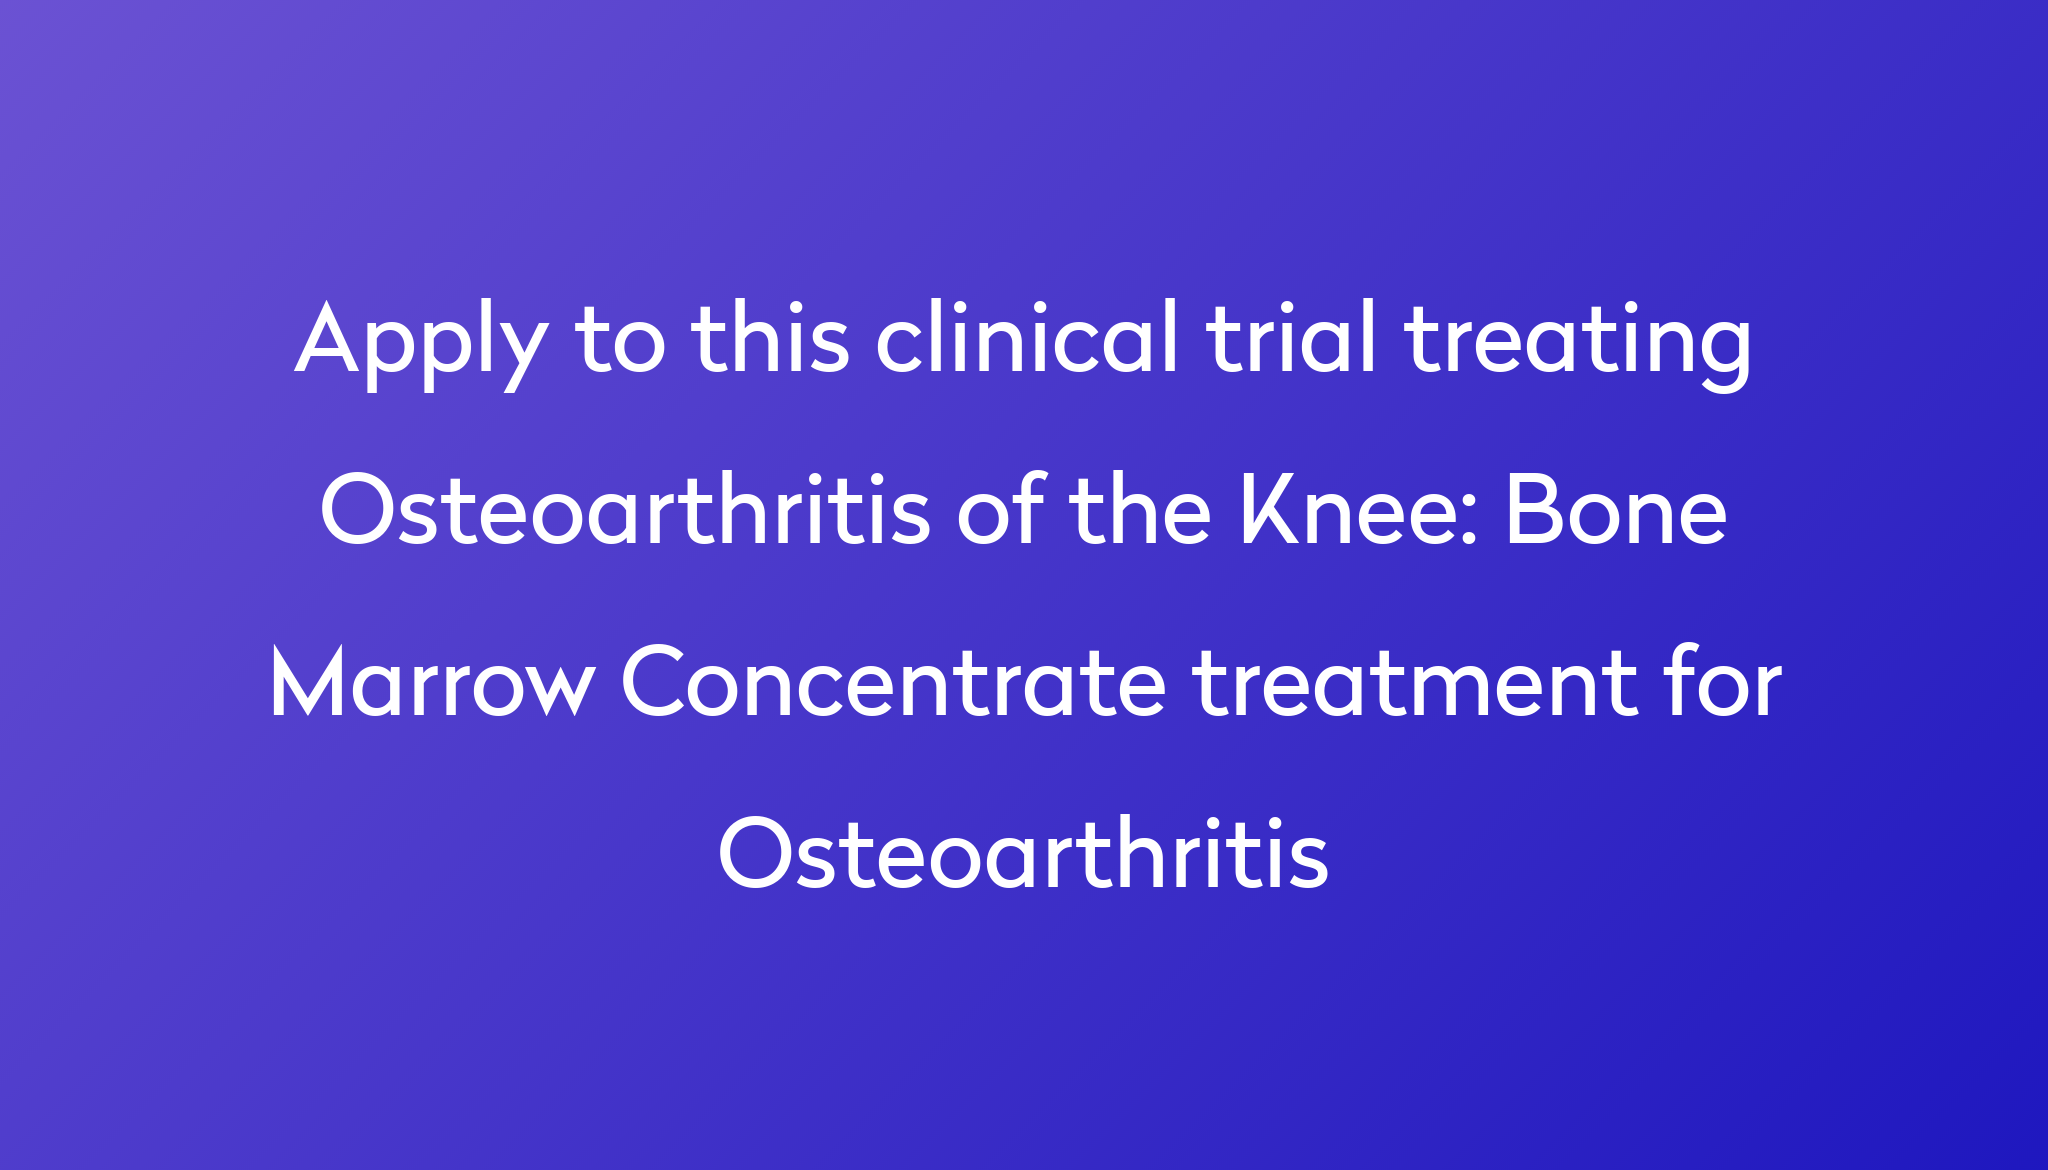 Bone Marrow Concentrate treatment for Osteoarthritis Clinical Trial